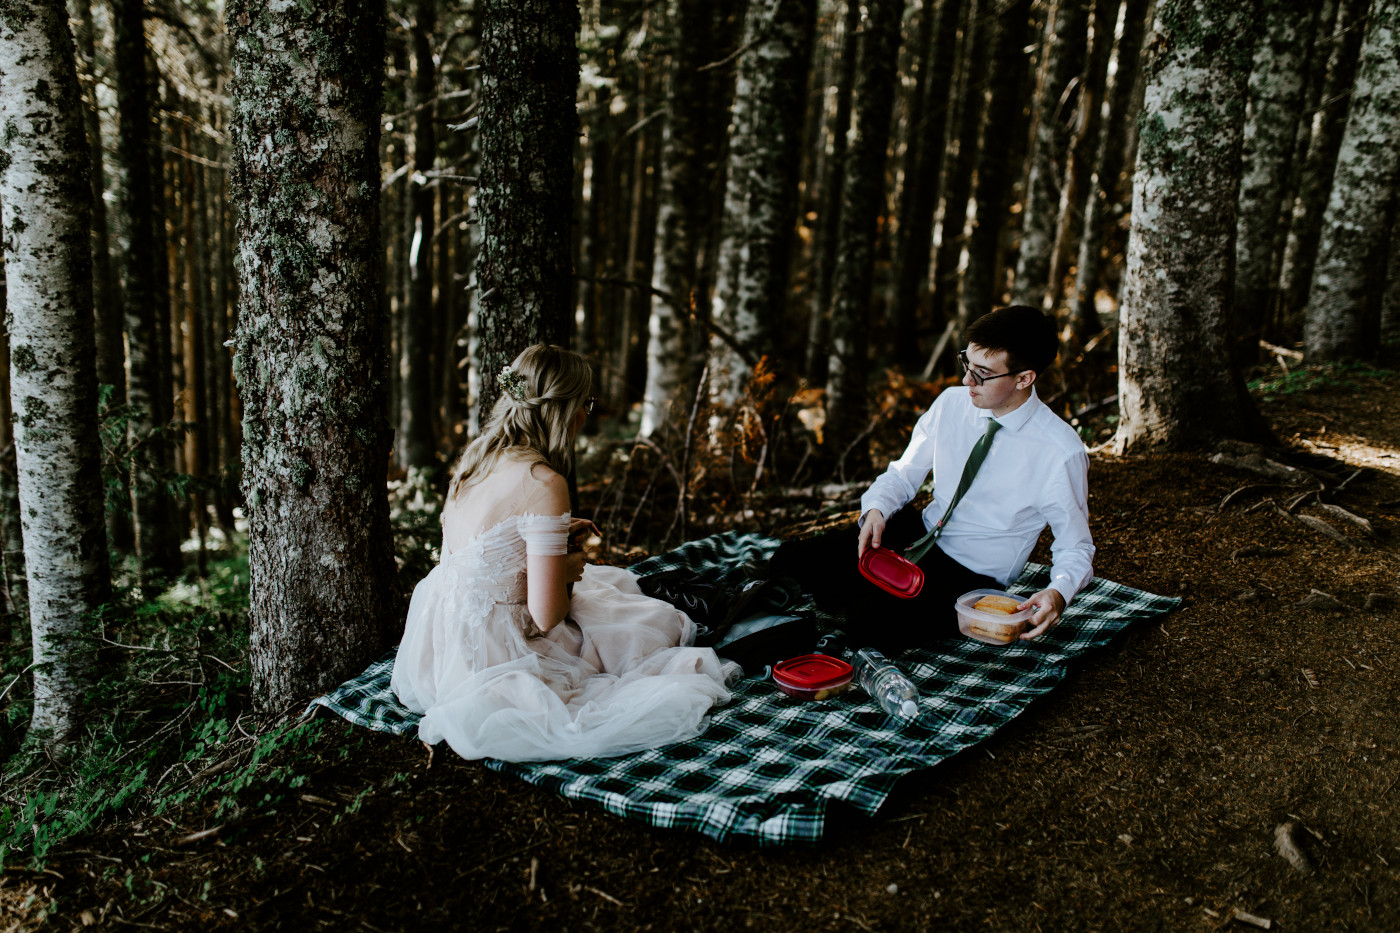 Corey and Kylie have a picnic near Mount Hood in the National Forest.